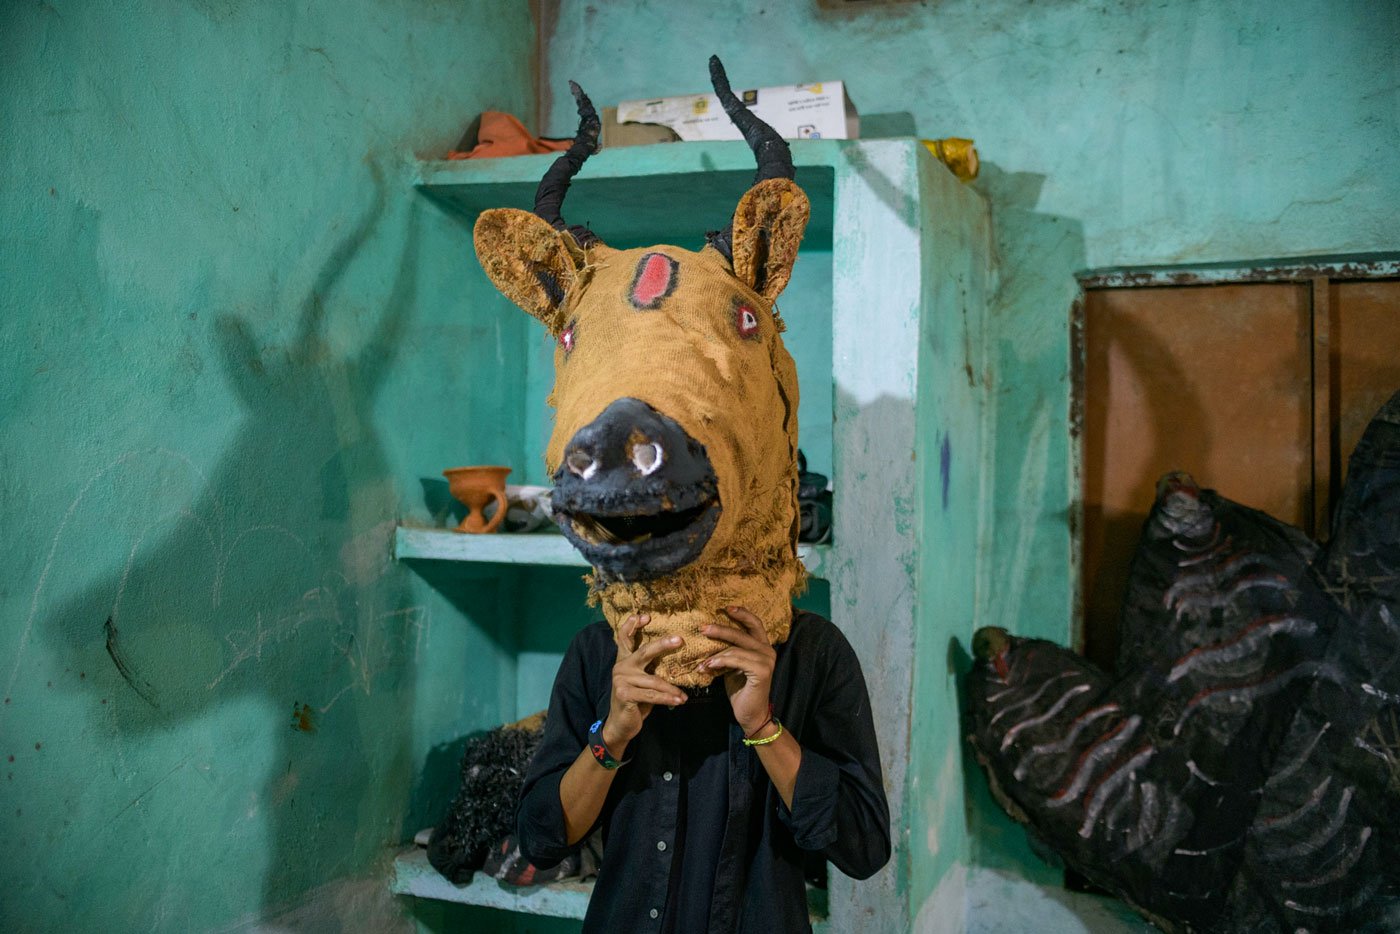 A young boy tries out one of the masks to be used in the performance